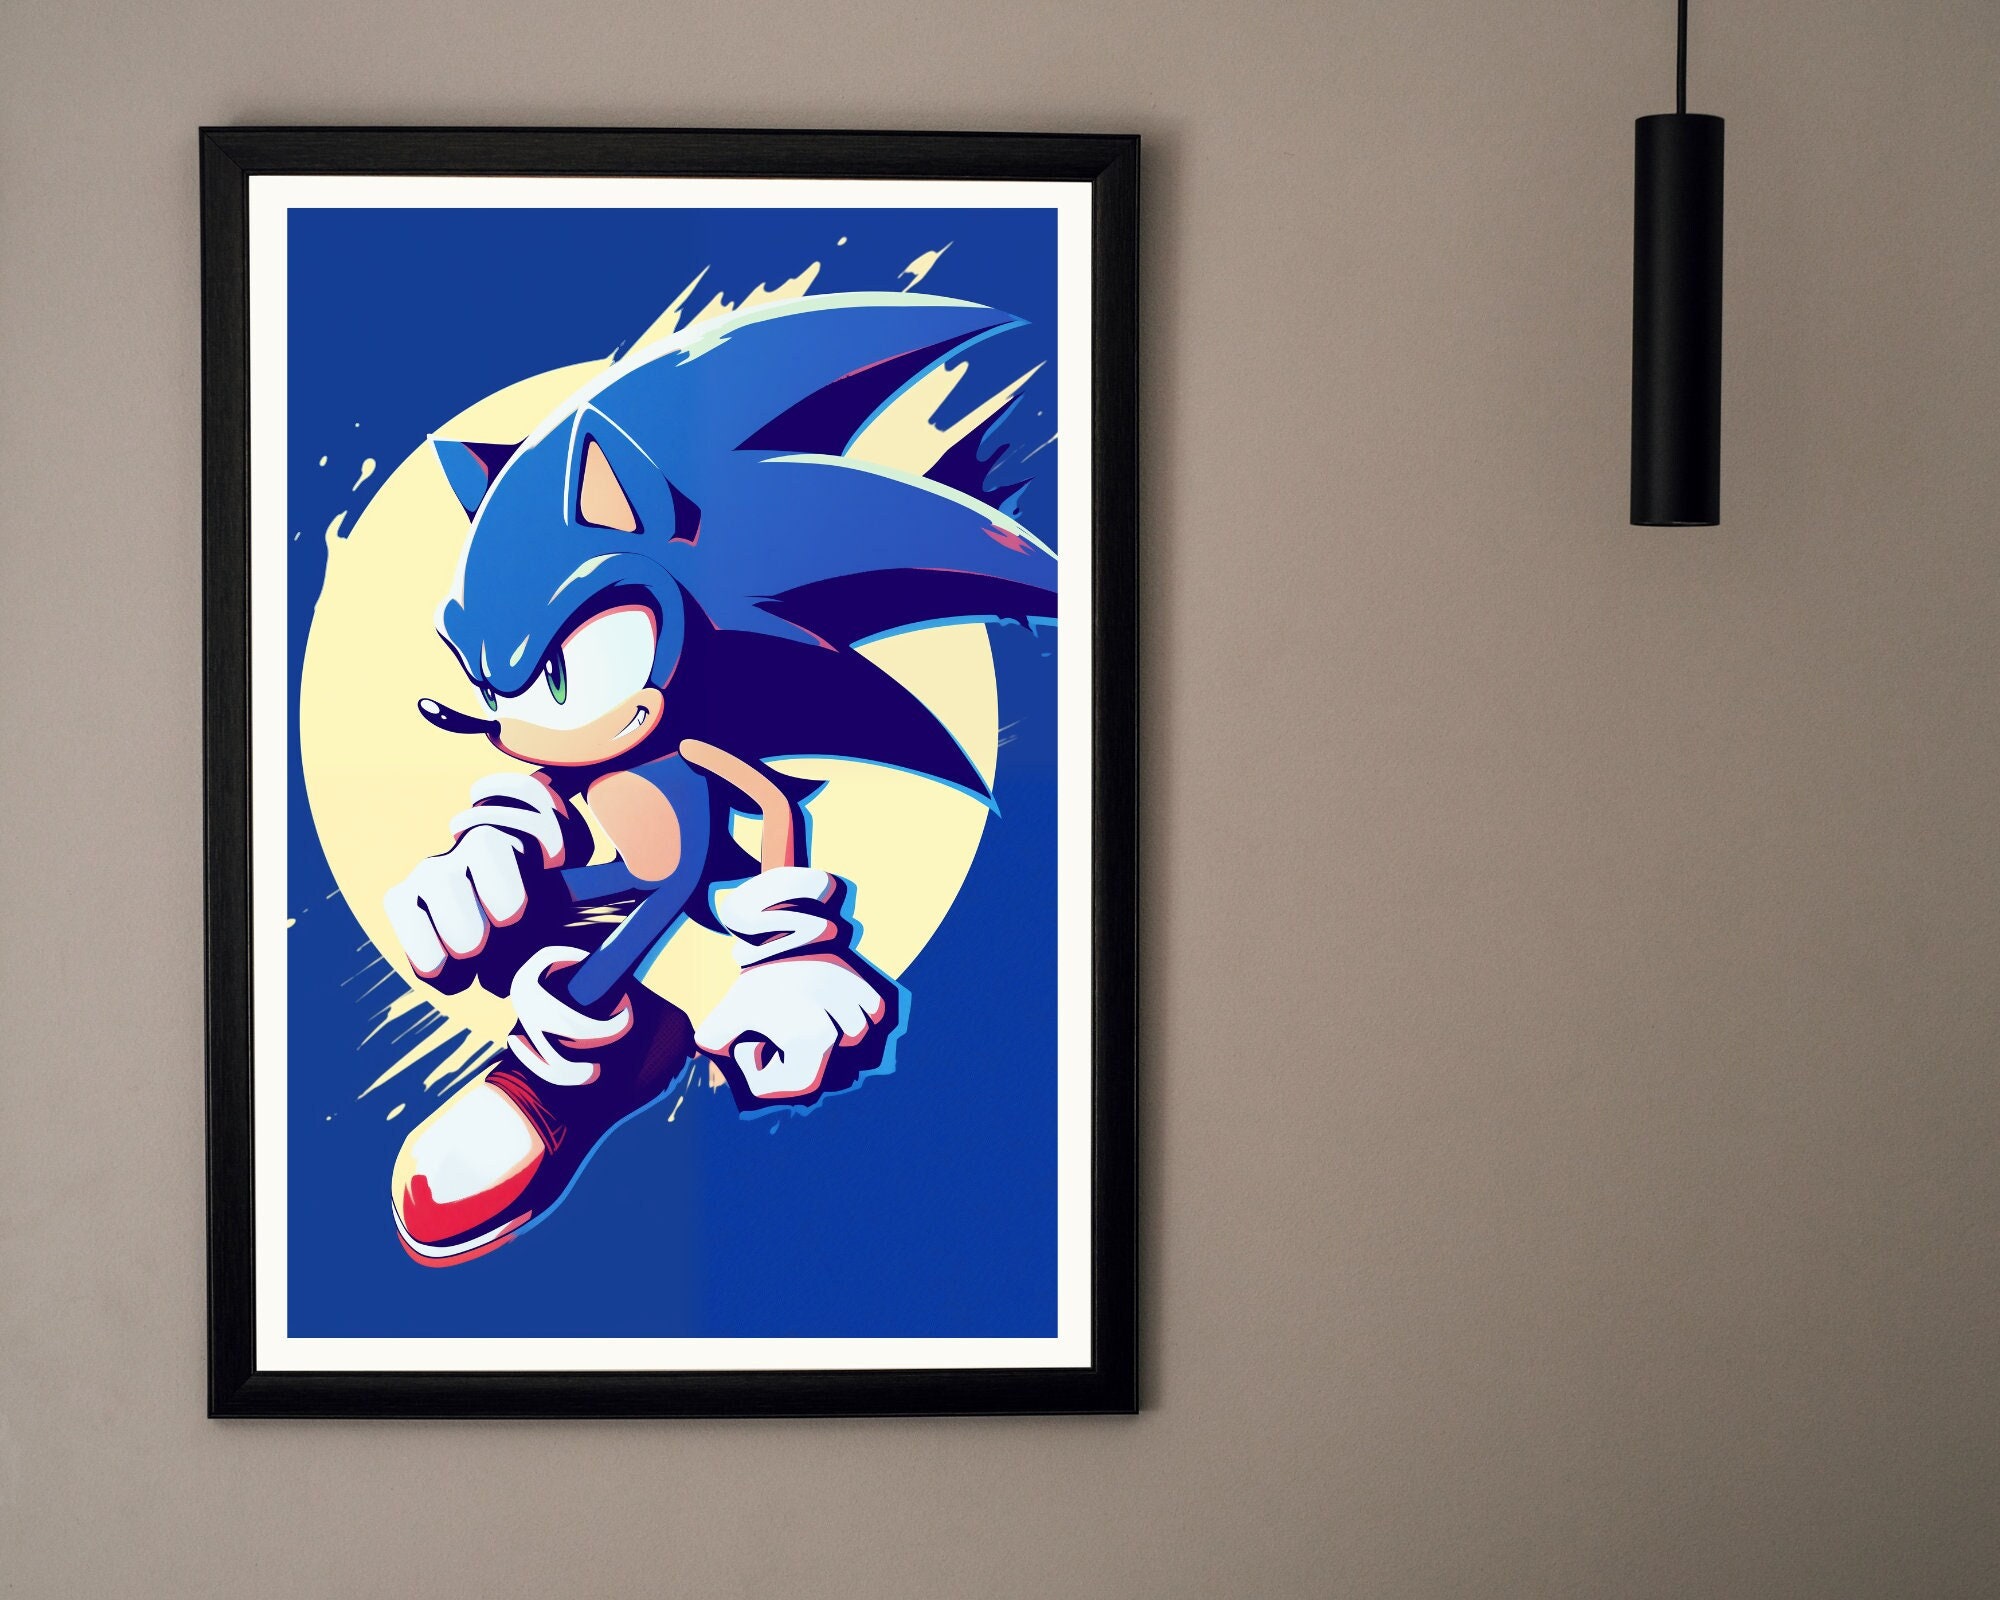 Sonic the Hedgehog Movie Poster Framed and Ready to Hang. -  Norway